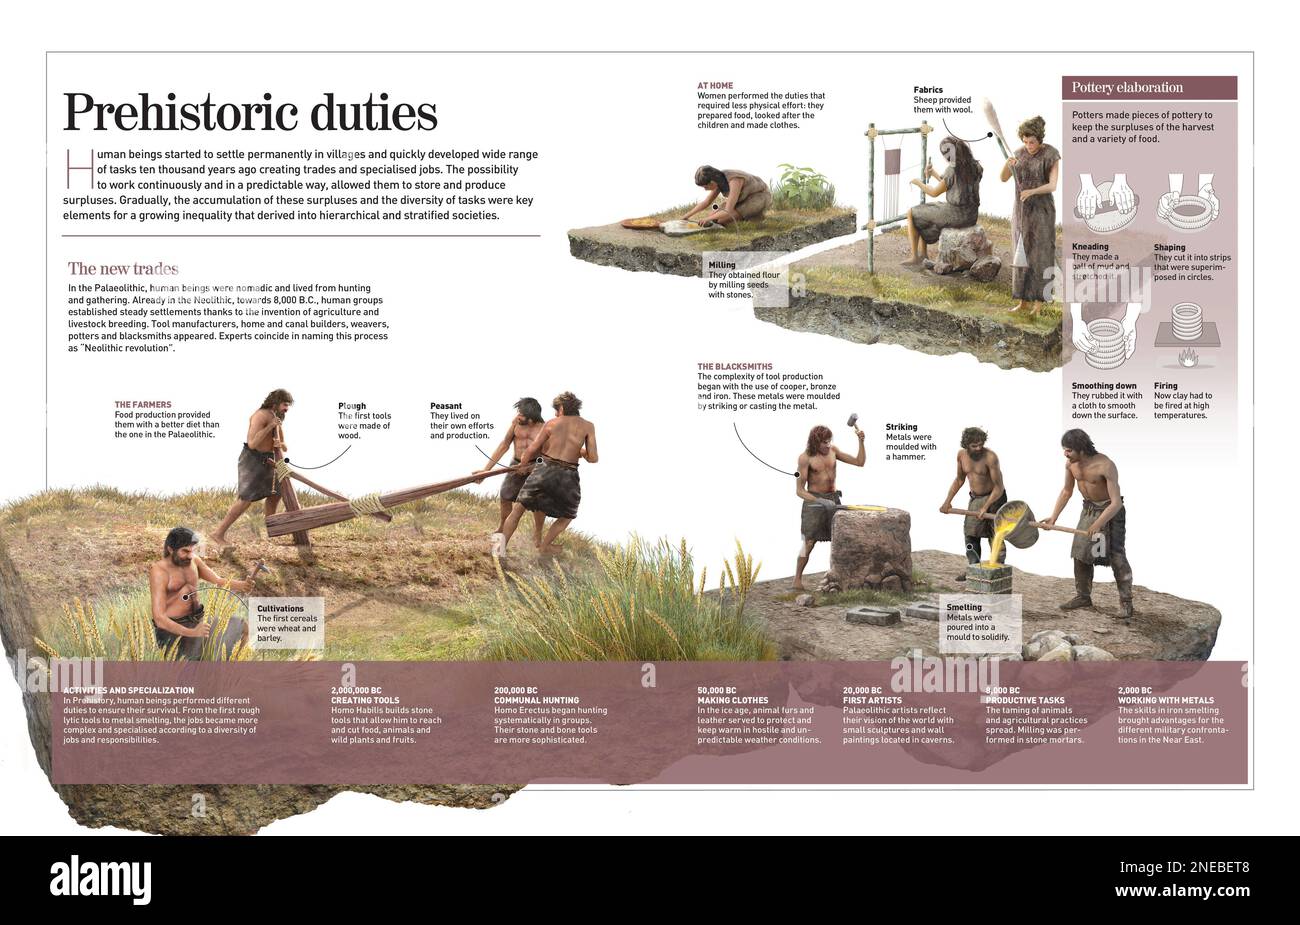 Infographic about the different tasks performed in the prehistory: agriculture, stockbreeding, working metals, pottery making, hunting, etc. [Adobe InDesign (.indd); 4960x3188]. Stock Photo